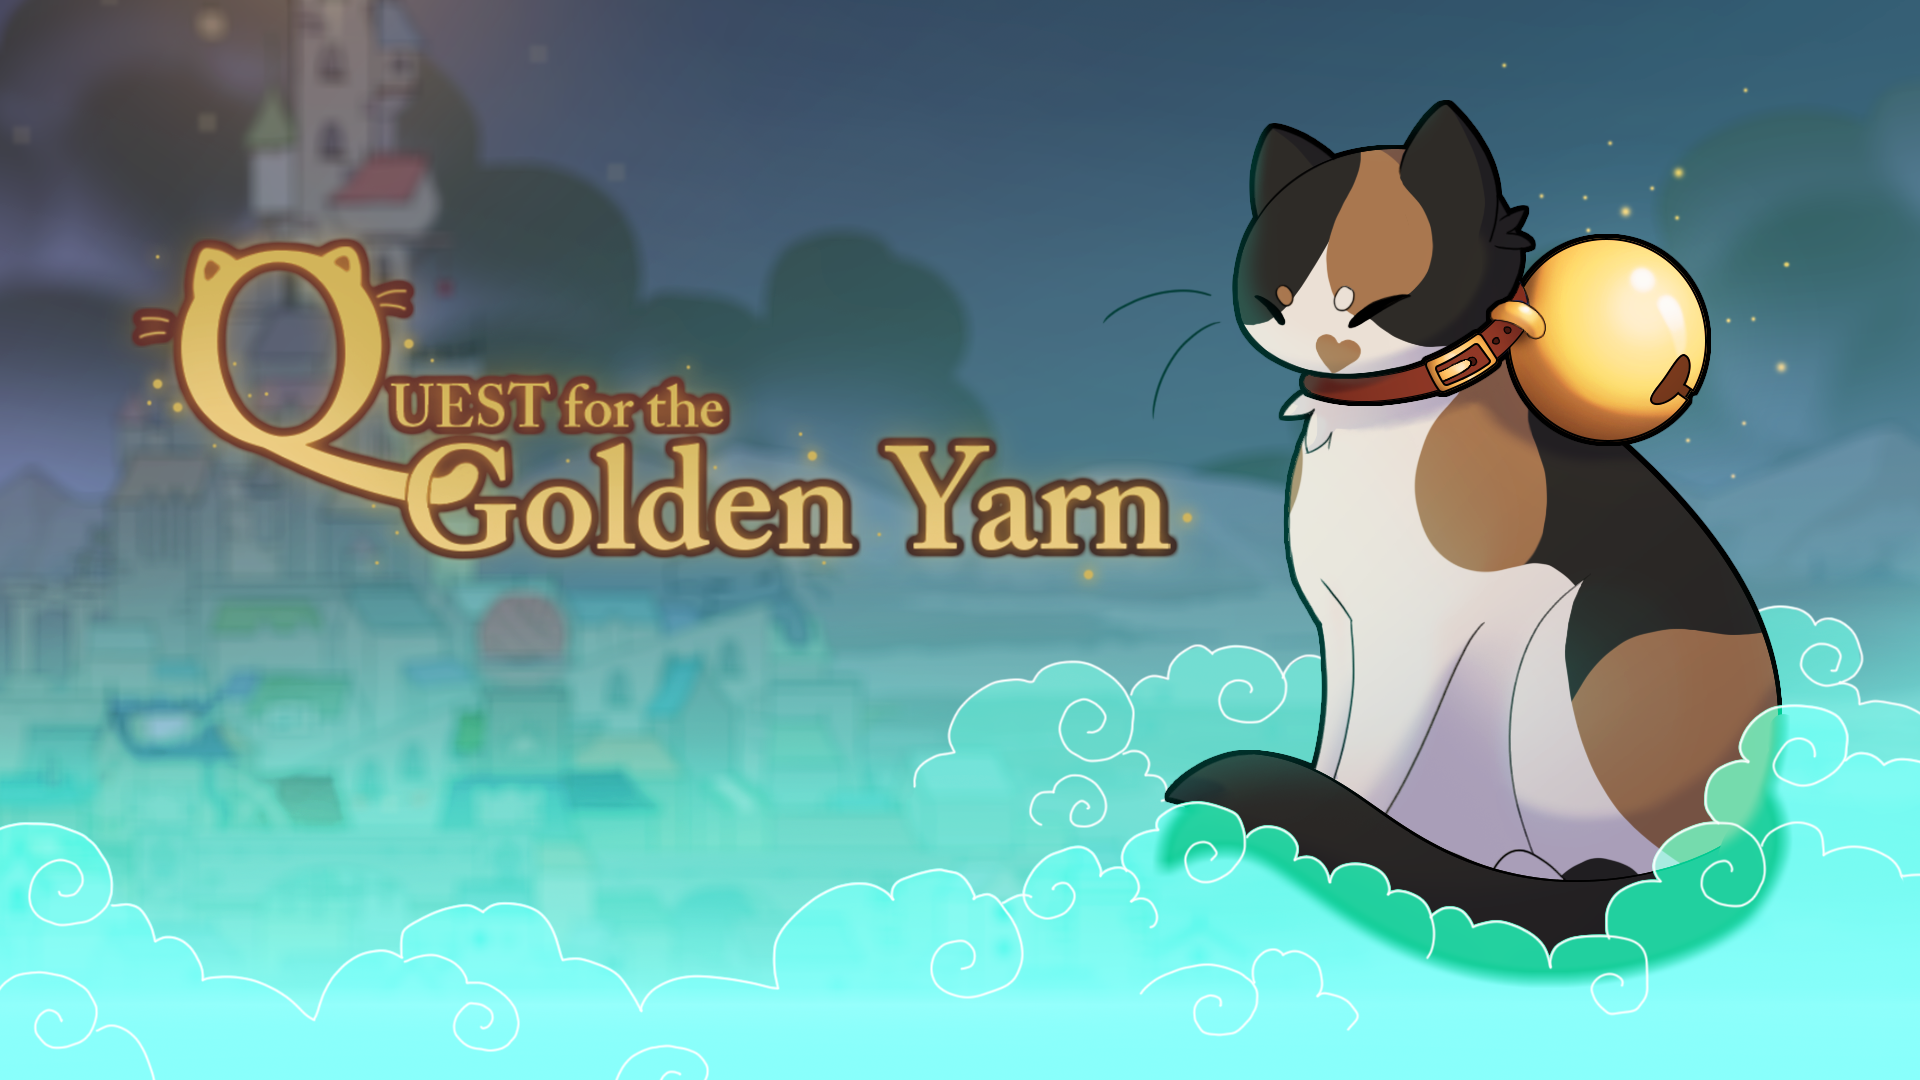 Quest for the Golden Yarn